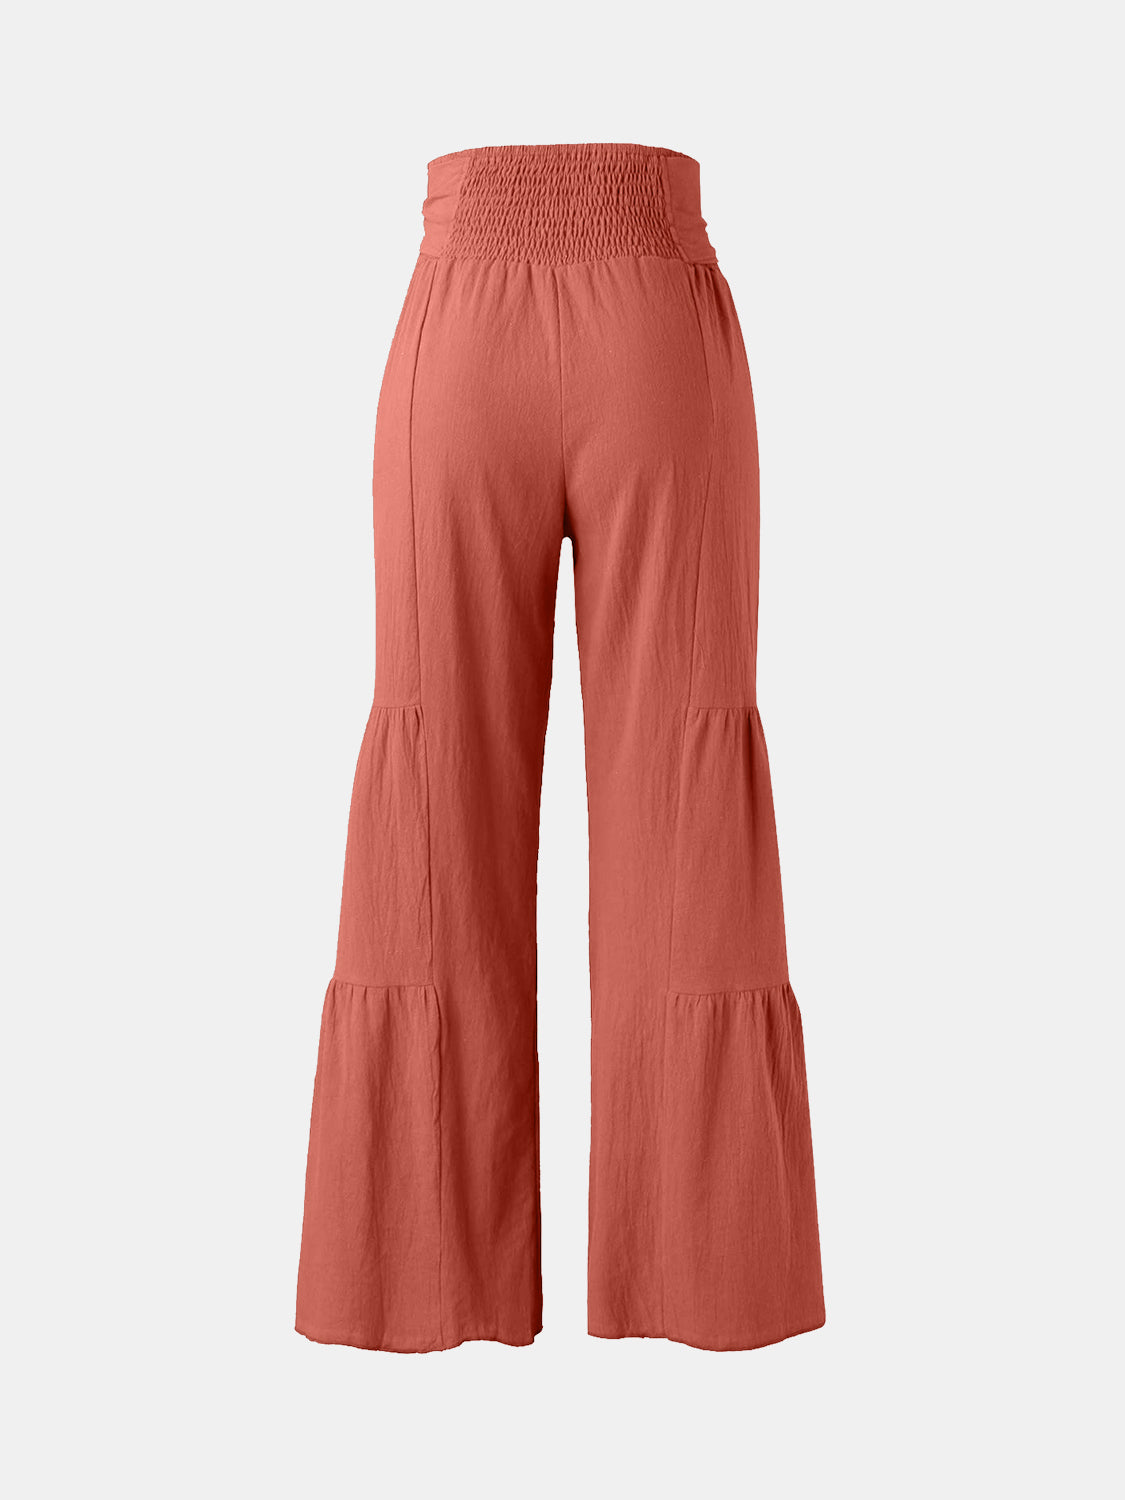 Tied Ruched Wide Leg Pants Orange-Red